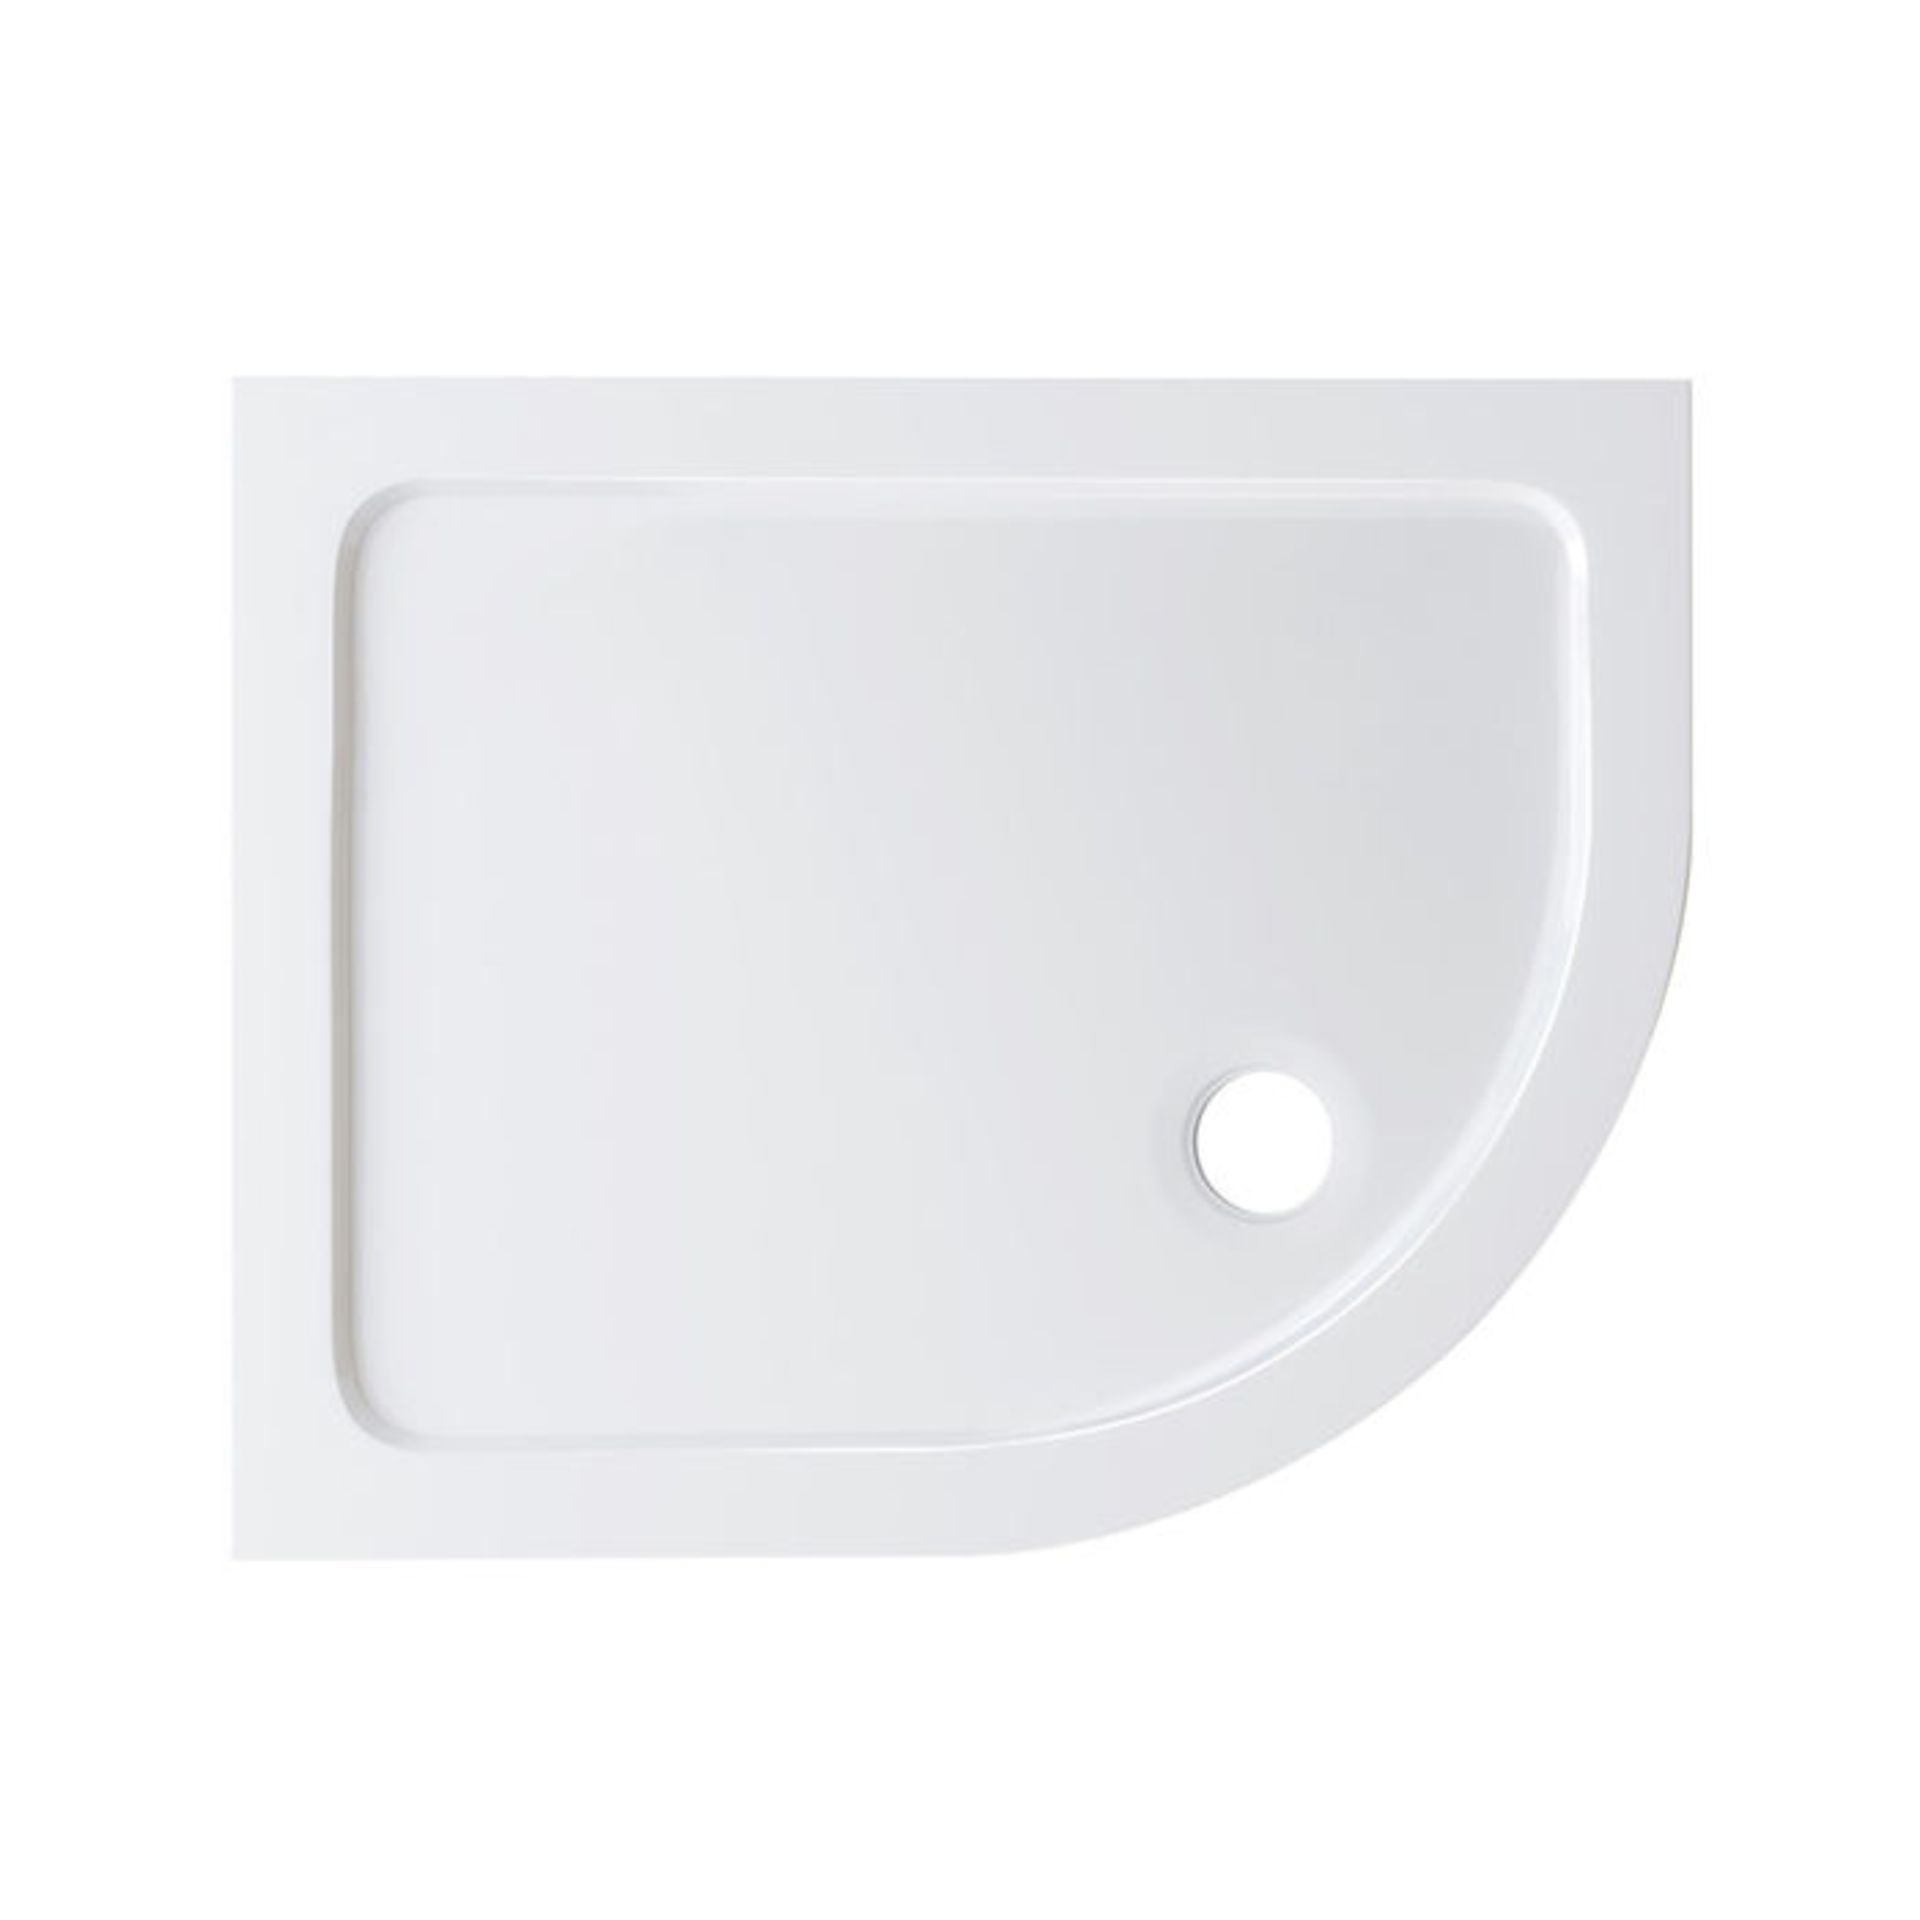 (W118) 1000x800mm Offset Quadrant Ultra Slim Stone Shower Tray - Right. RRP £249.99. Low profile